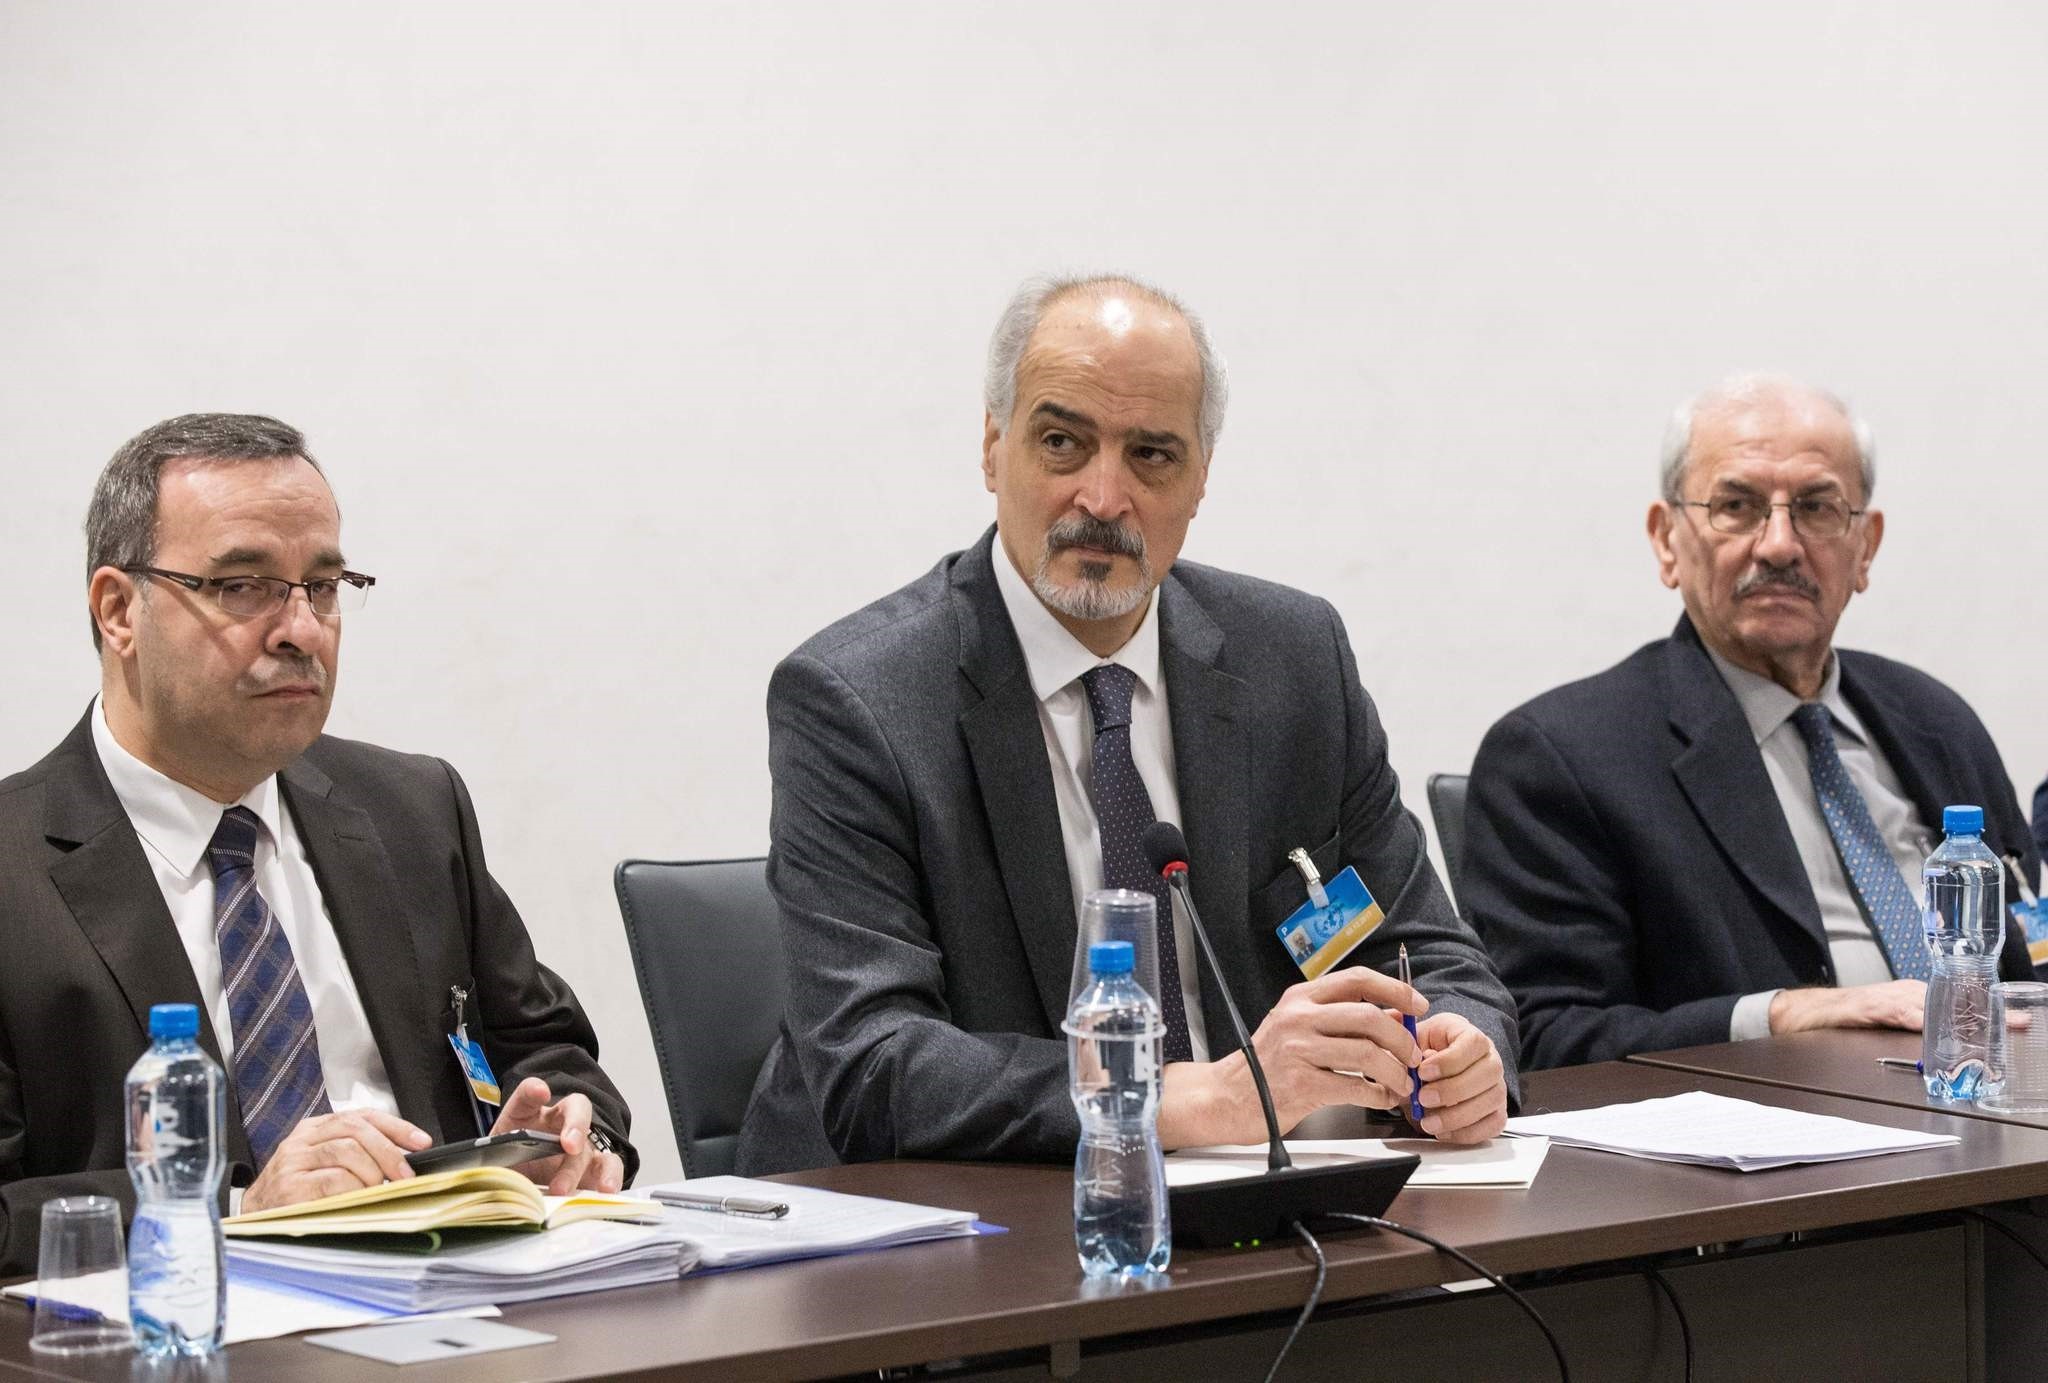 Syrian Ambassador to the UN and head of the regime delegation Bashar al-Jaafari (C) attends a meeting during the Intra-Syrian talks in Geneva on November 30, 2017. (AFP Photo)